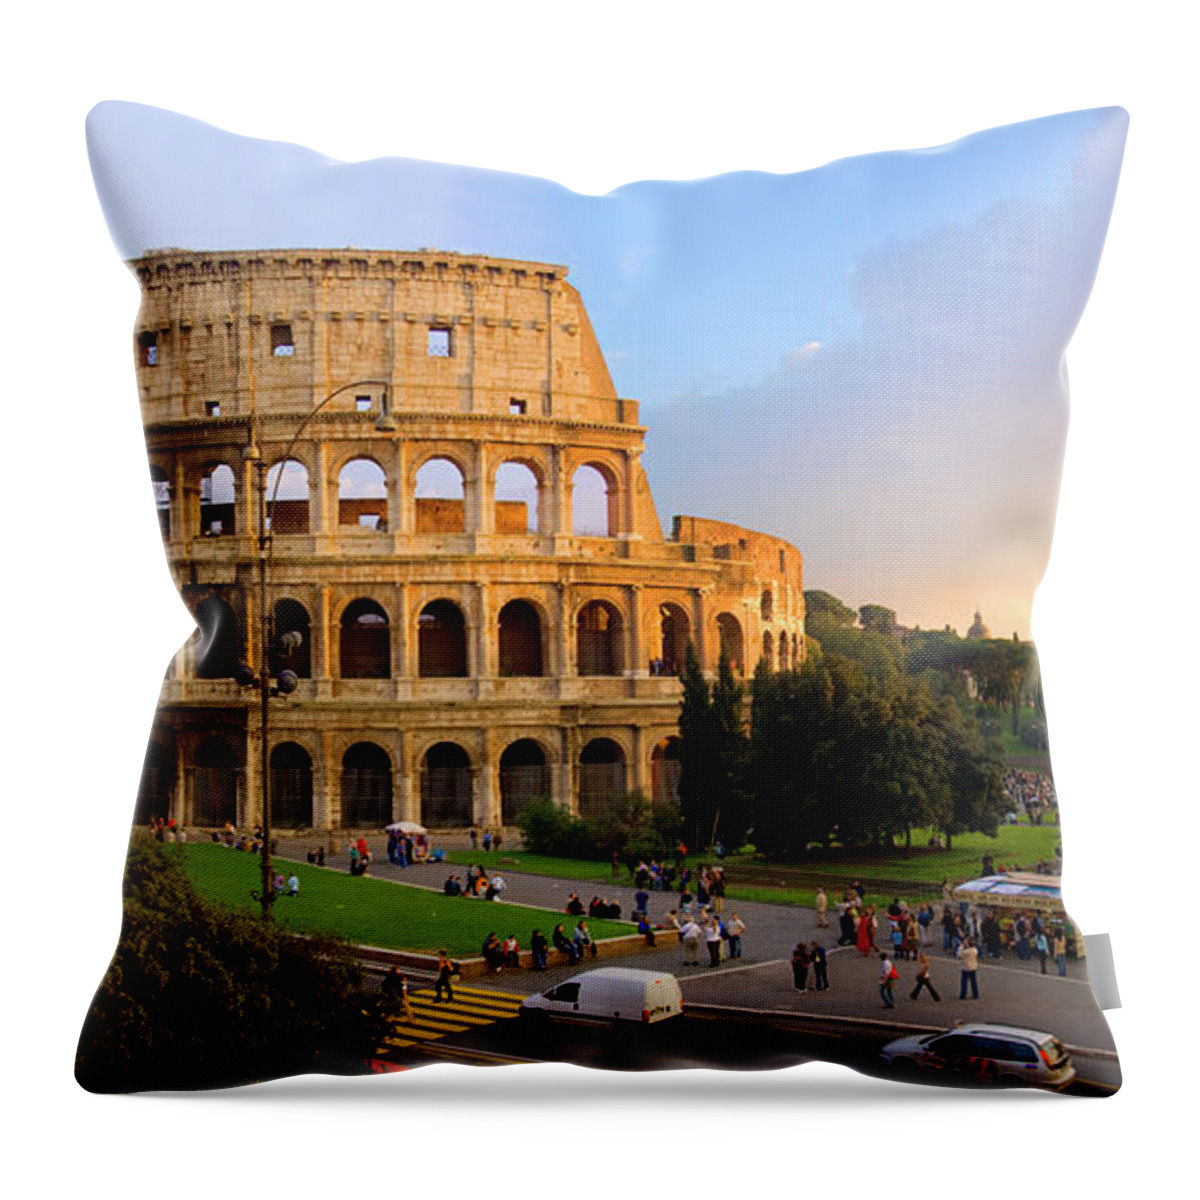 Damaged Throw Pillow featuring the photograph Tourist At Colosseum by Maremagnum